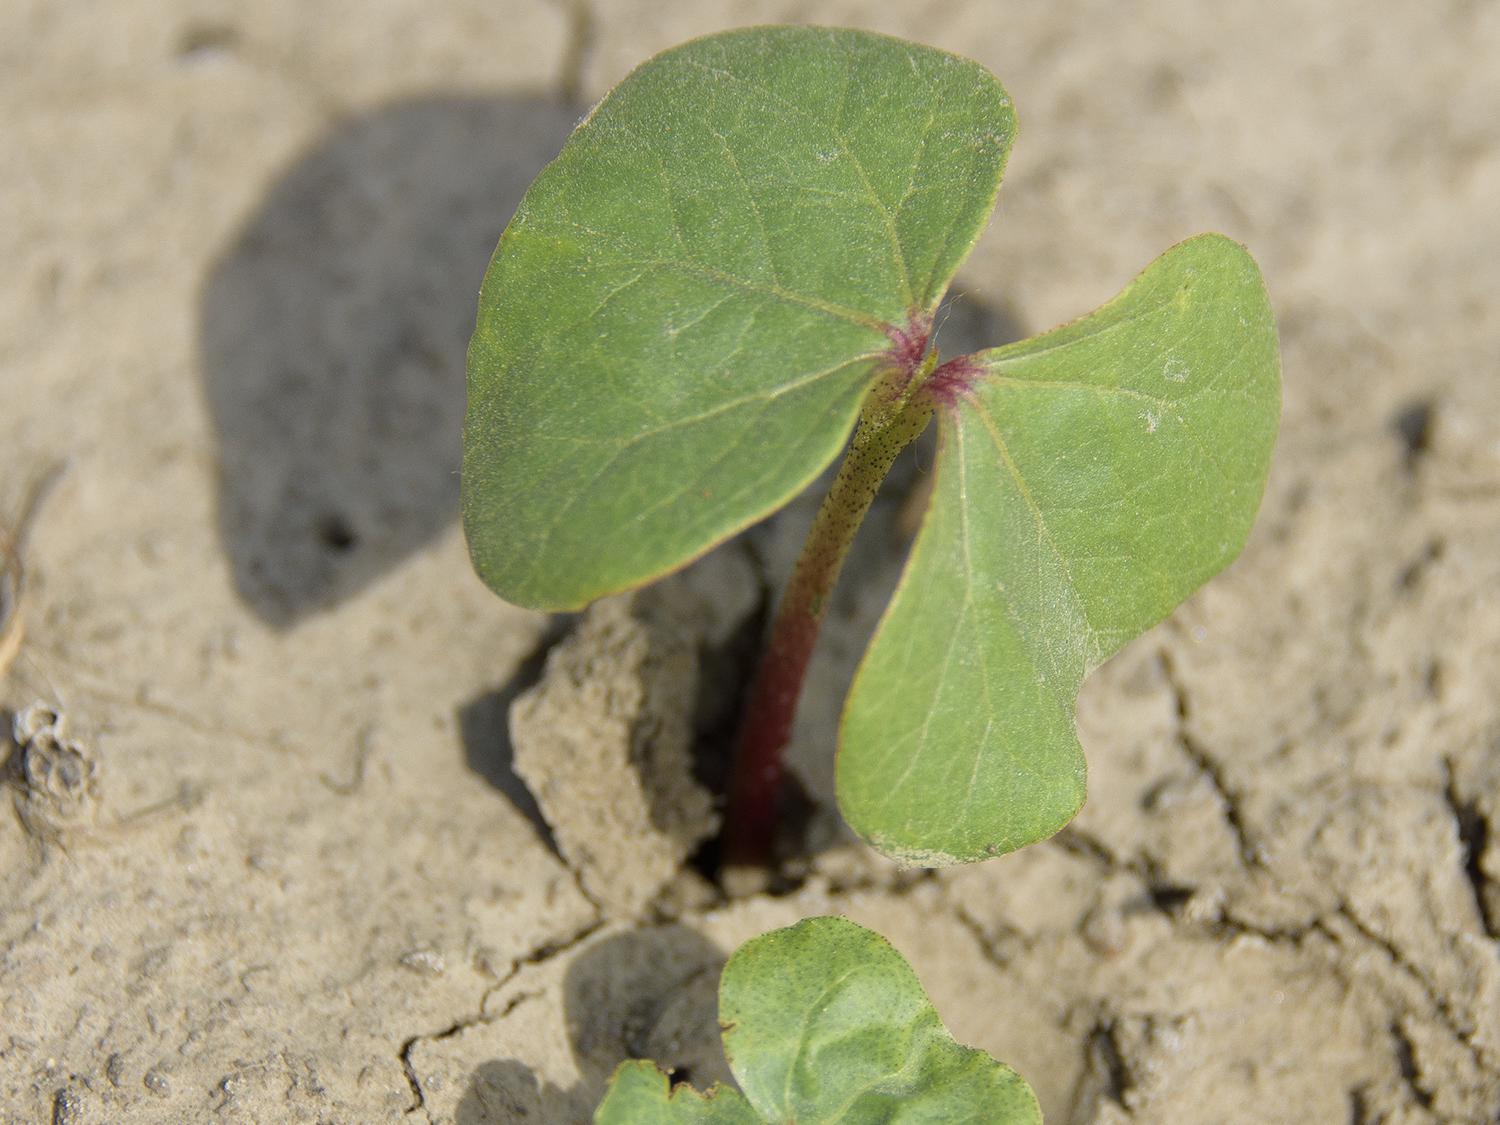 Good planting weather in mid-May is allowing Mississippi cotton growers to get the crop planted quickly. This seedling cotton was growing on a Leflore County farm May 19, 2016. (Photo by MSU Extension Service/Kevin Hudson)